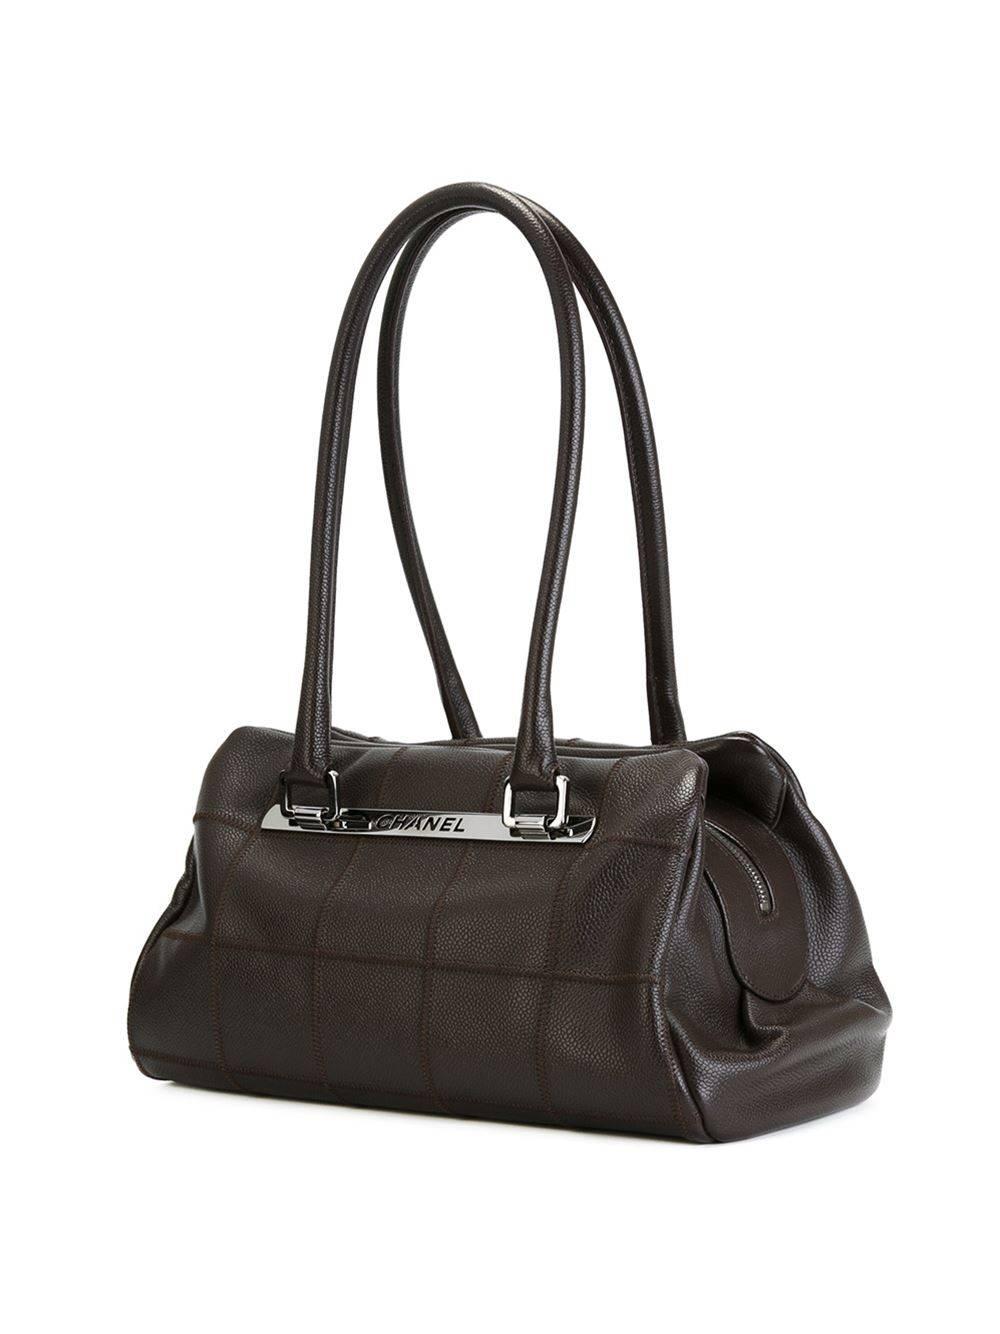 Brown leather bowling bag featuring a silver-tone logo plaque, a top zip fastening and round top handles. 

Colour: Brown

Material: Leather 100%

Measurements: W: 33cm, H: 23cm, D: 16cm, Handle: 26cm

Condition: 8 out of 10
Very Good